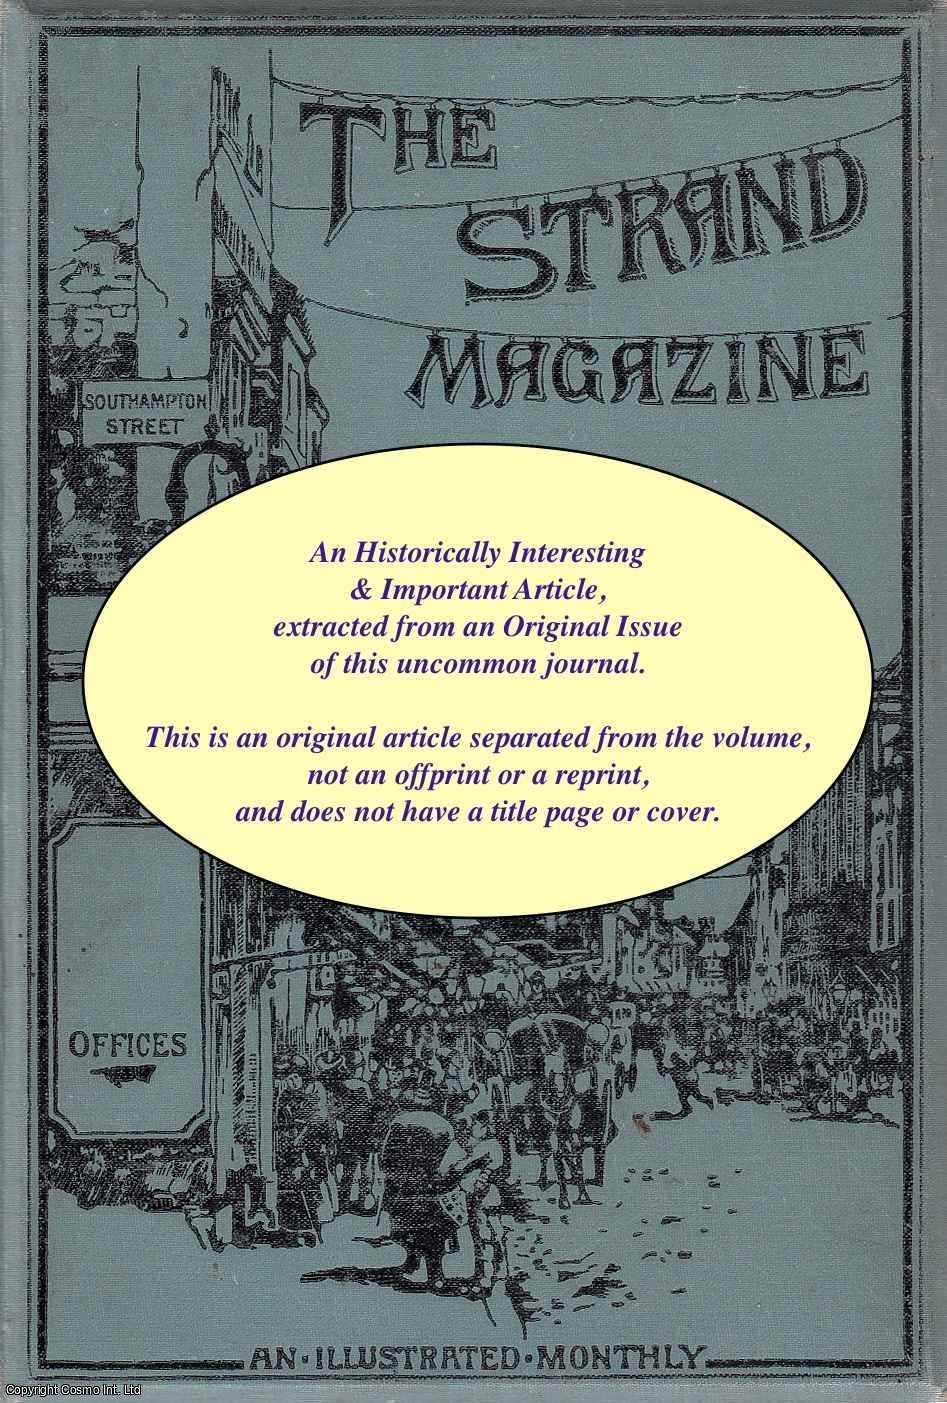 Strand Magazine - Humours of The Post Office, with Facsimiles : pictorial curiosity which passes through the post. A complete 2 part uncommon original article from The Strand Magazine, 1891.